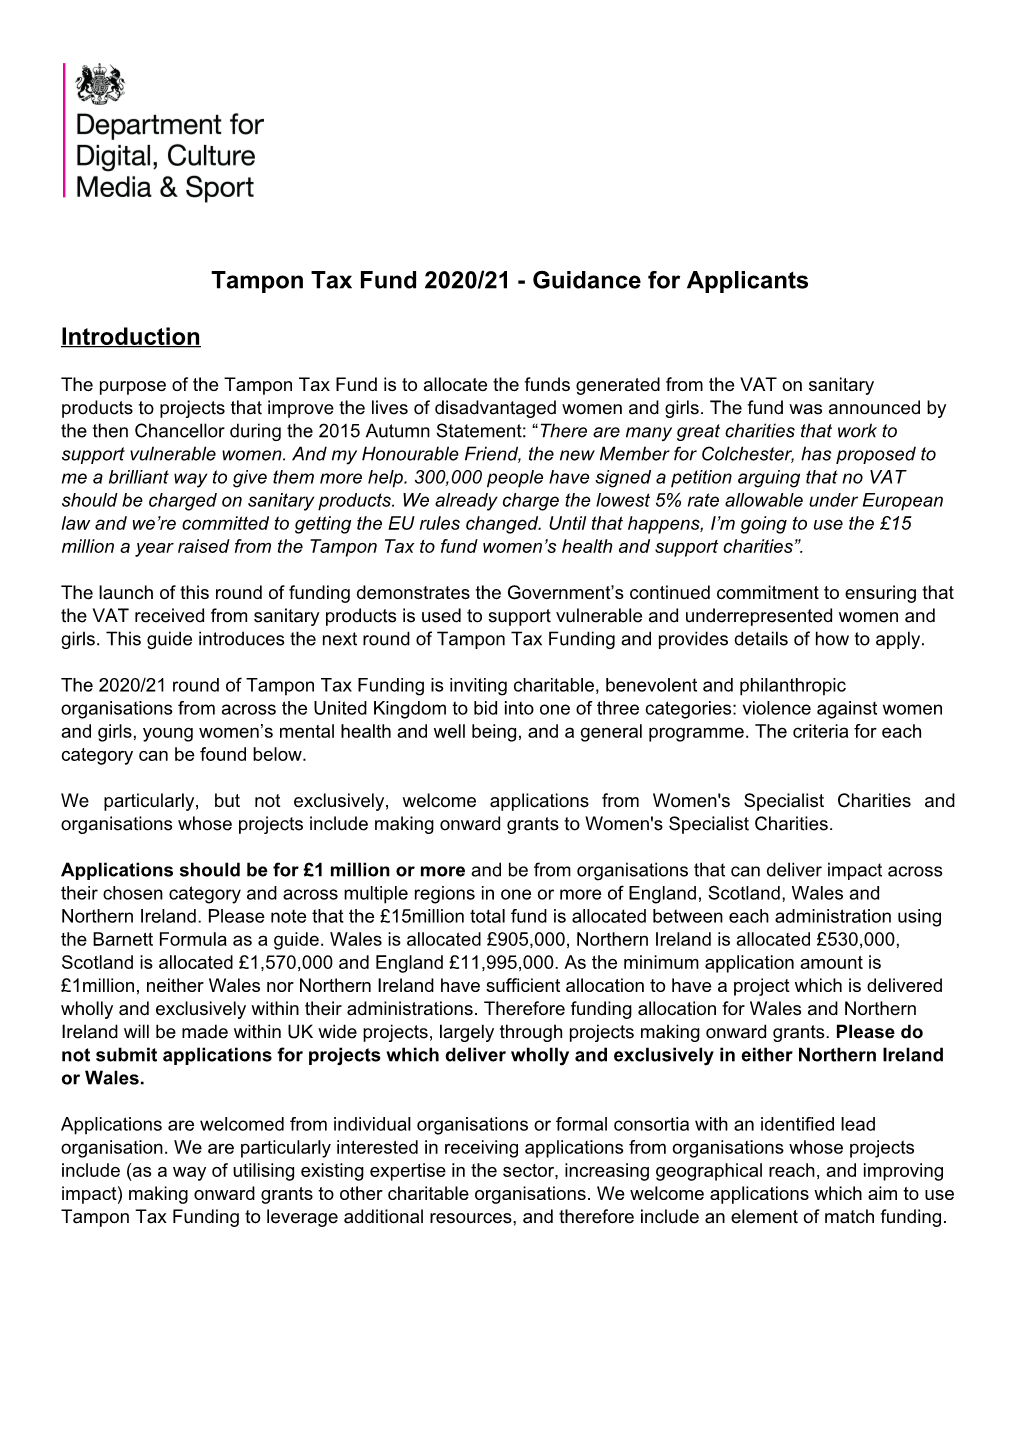 Tampon Tax Fund 2020/21 - Guidance for Applicants